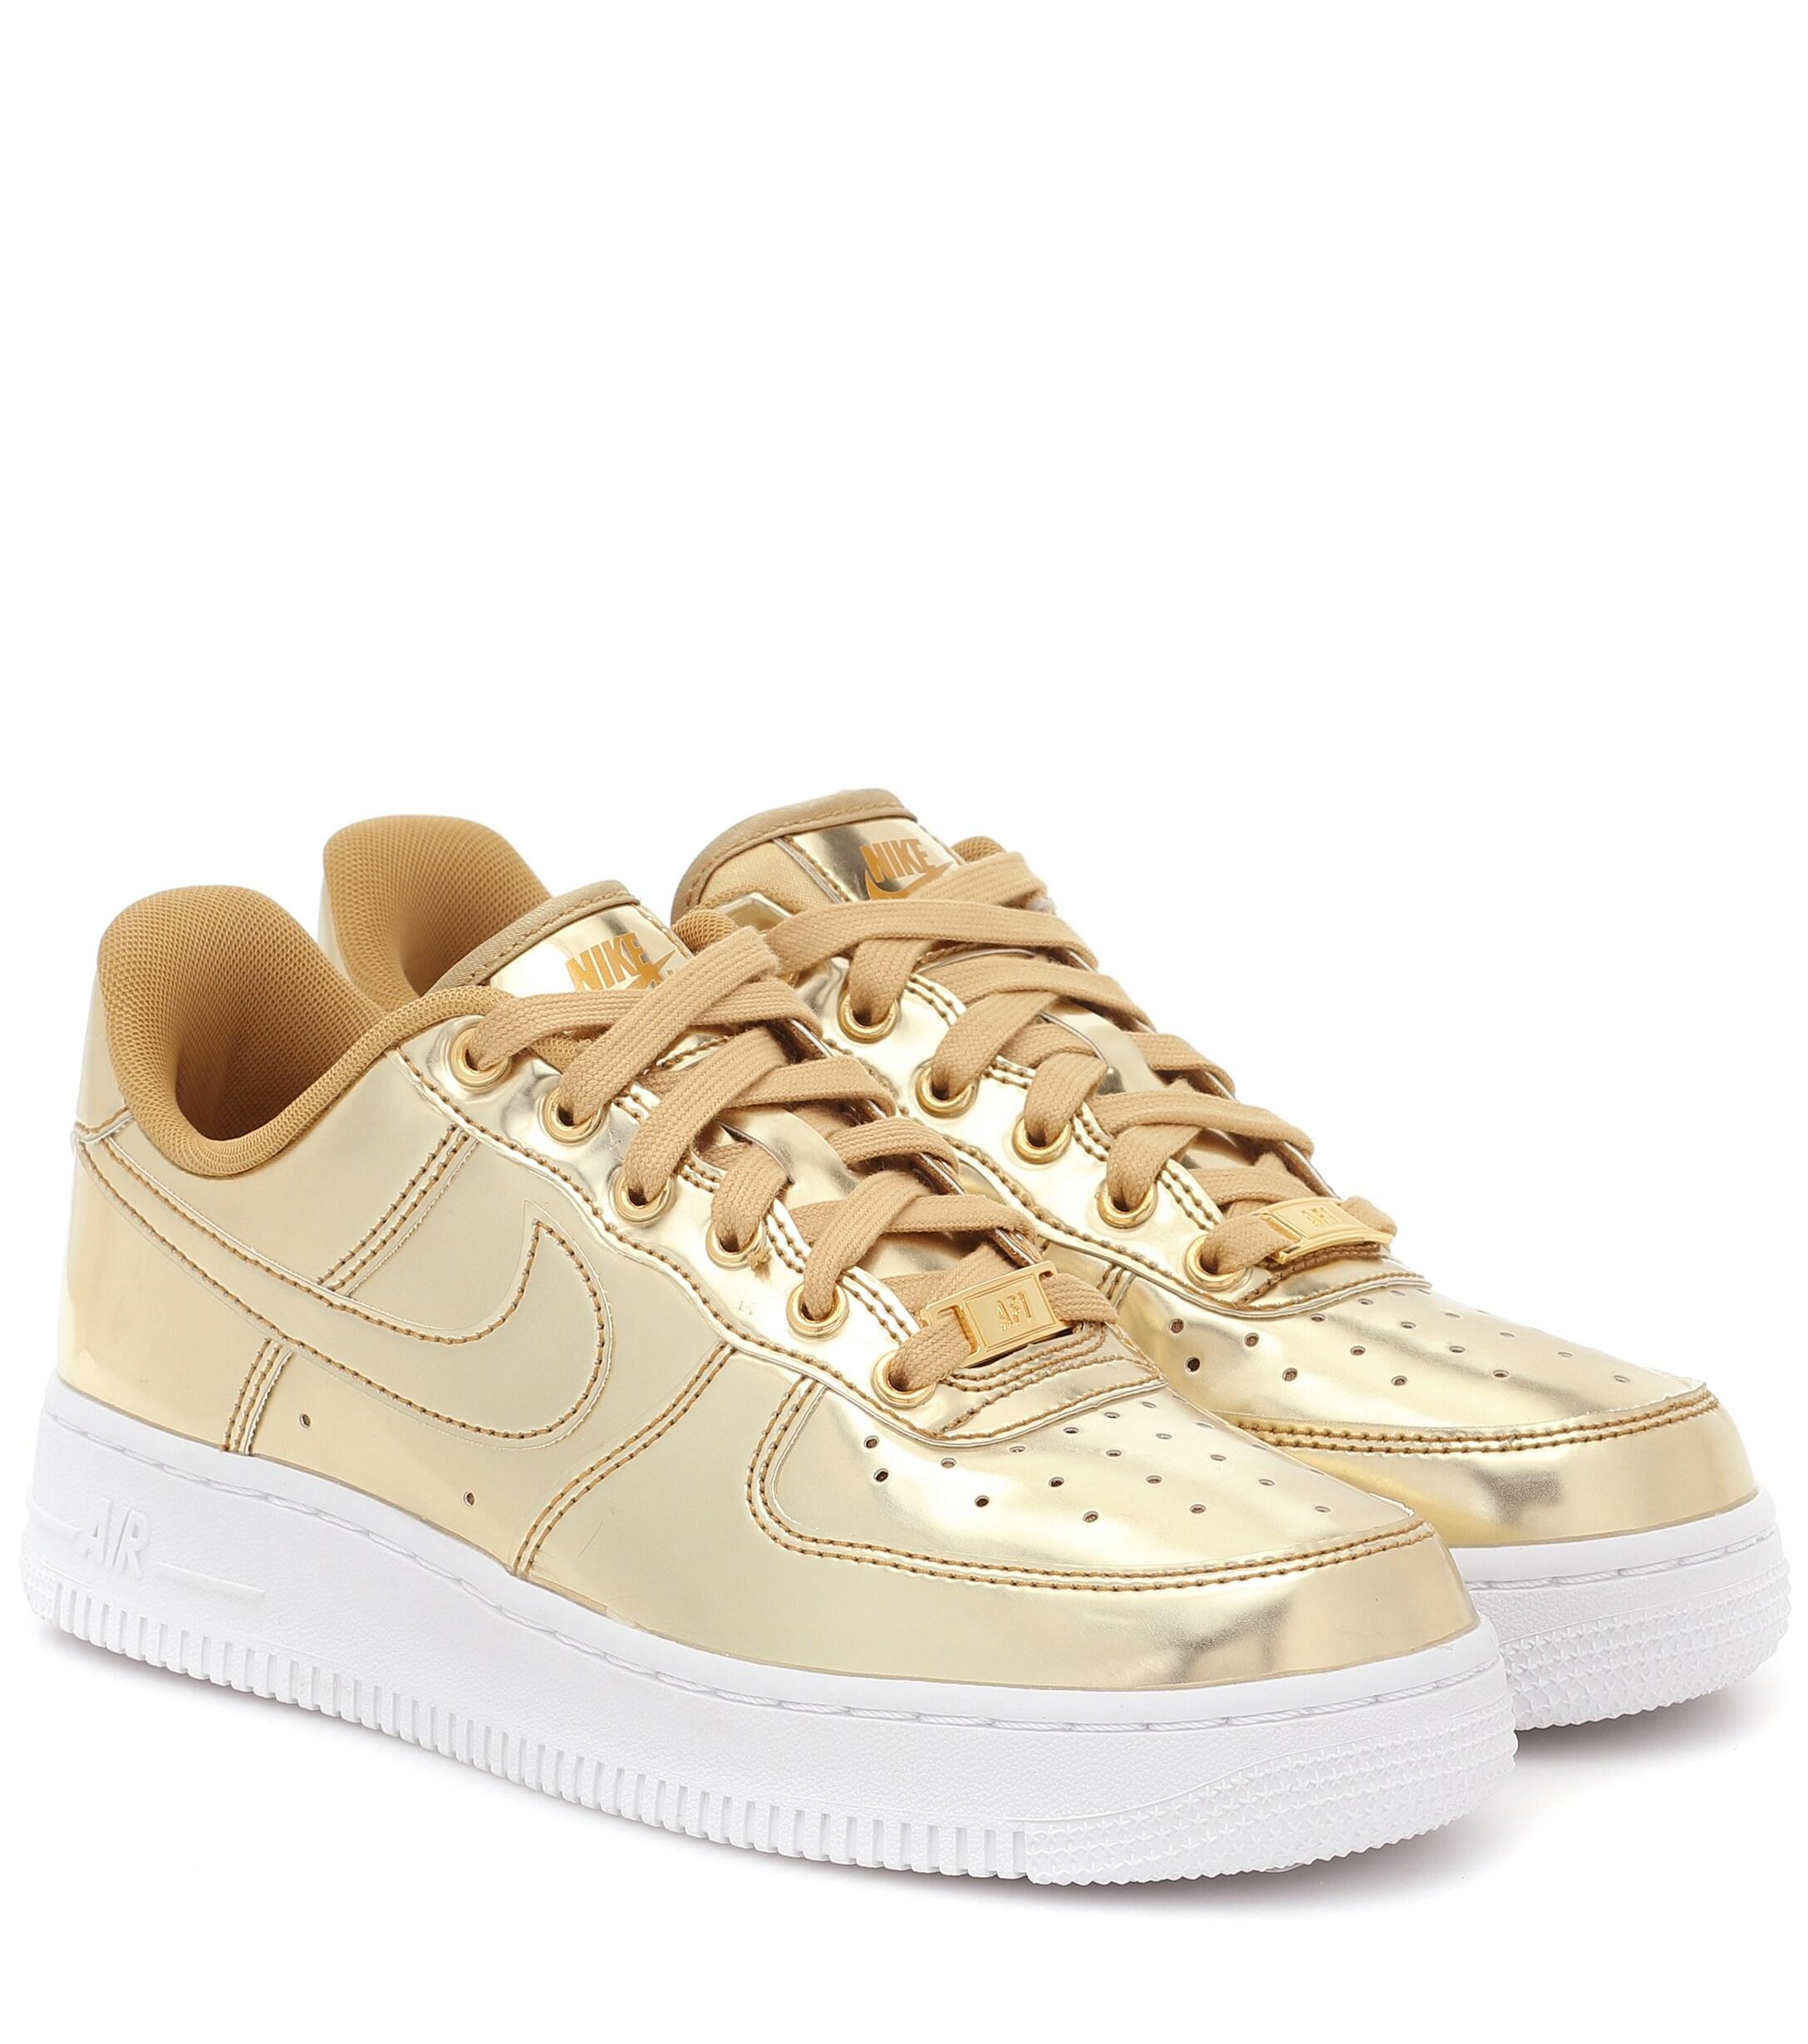 Nike Lace Air Force 1 Sp Sneakers in Gold (Metallic) - Save 85% | Lyst  Australia